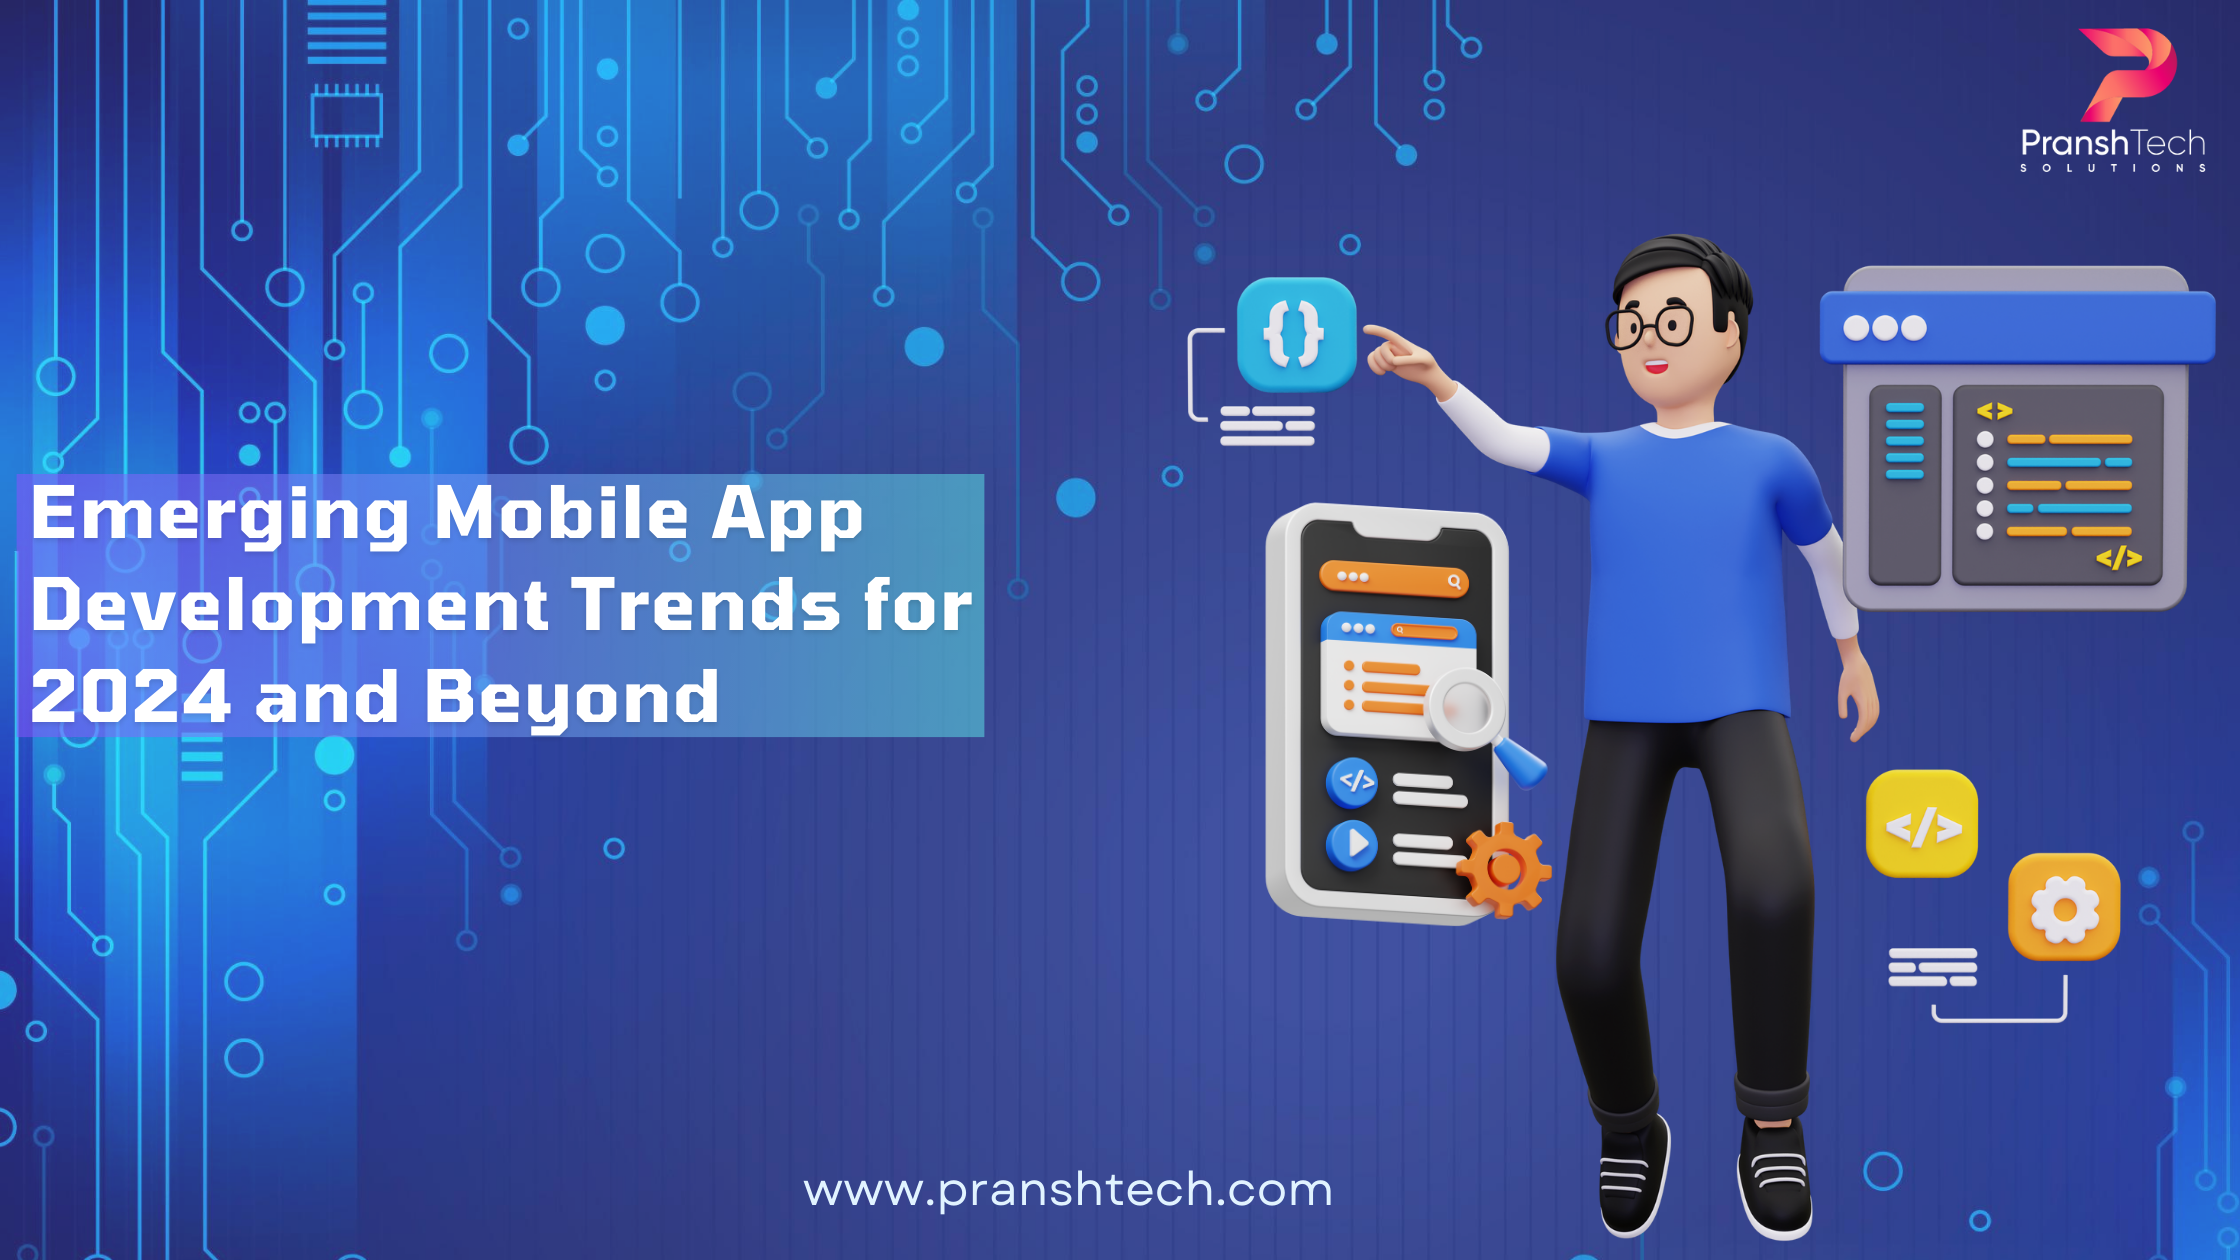 Emerging Mobile App Development Trends for 2024 and Beyond